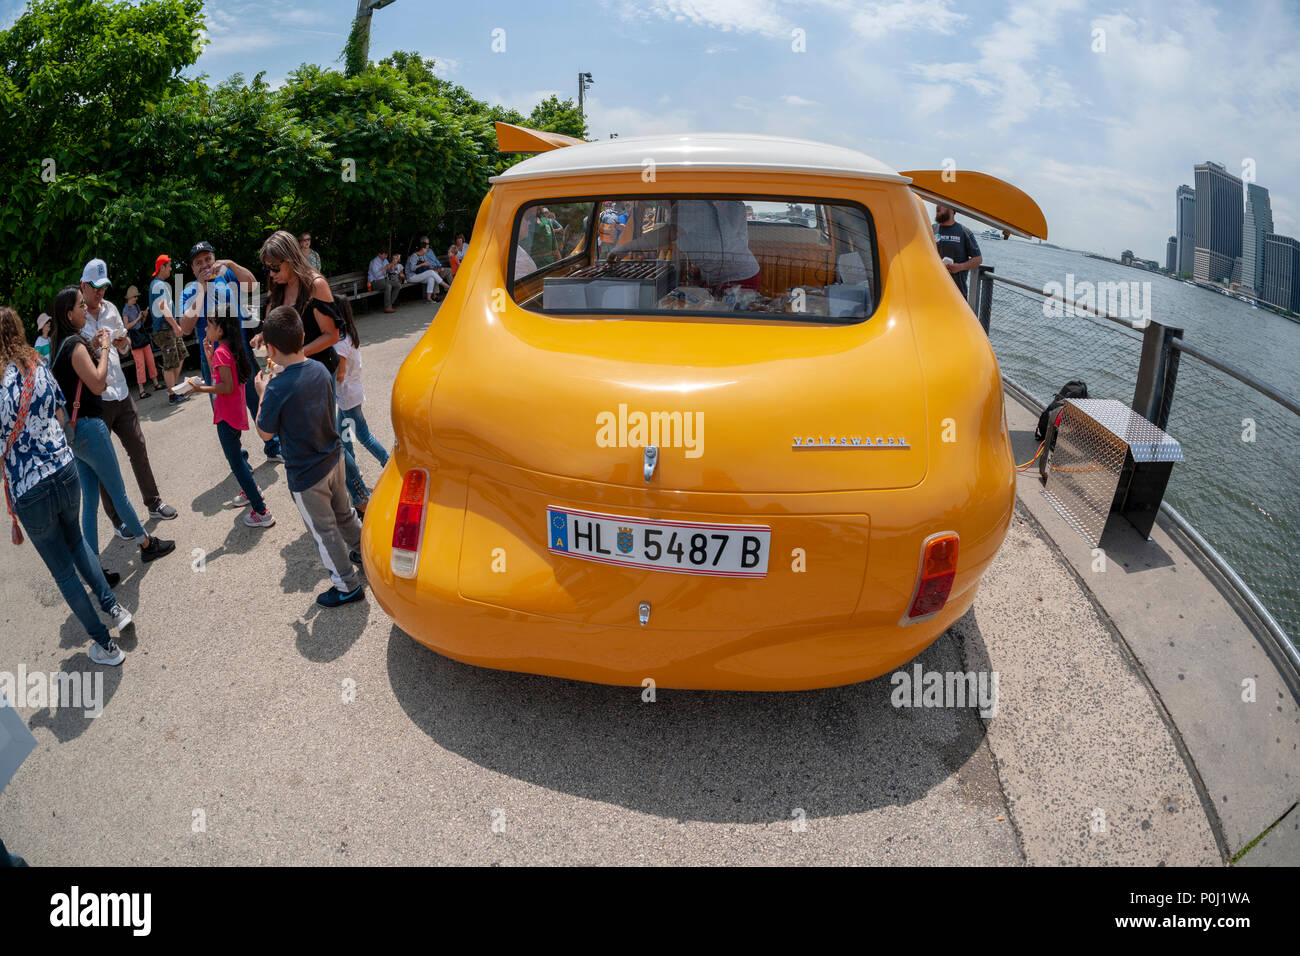 Brooklyn, USA. 9th June 2018. With the New York skyline behind them visitors to Brooklyn Bridge Park in New York delight in artist Erwin Wurm's 'Hot Dog Bus' serving free hot dogs to any and all, seen on opening day, Saturday, June 9, 2018. The Austrian artist modified a vintage Volkswagen Microbus into a bulbous bright yellow food truck, redefining the dichotomy between commerce and sculpture, albeit serving free iconic New York street food. The truck was previously the 'Curry Bus' serving wursts in Europe. Credit: Richard Levine/Alamy Live News Stock Photo